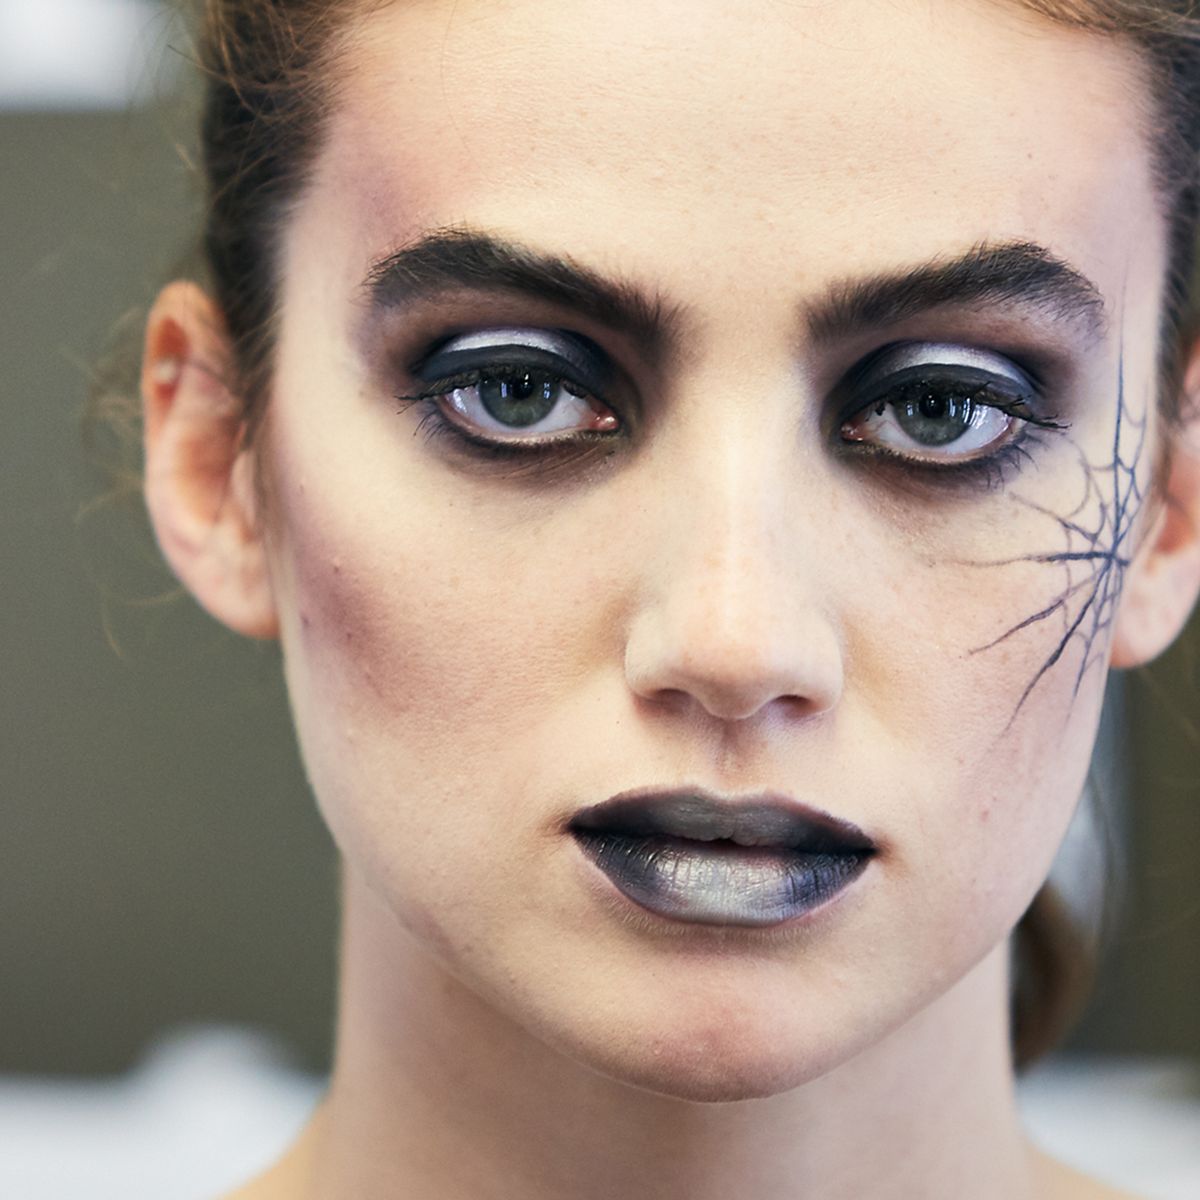 5 Easy Halloween Makeup Looks Using Products You Already Own